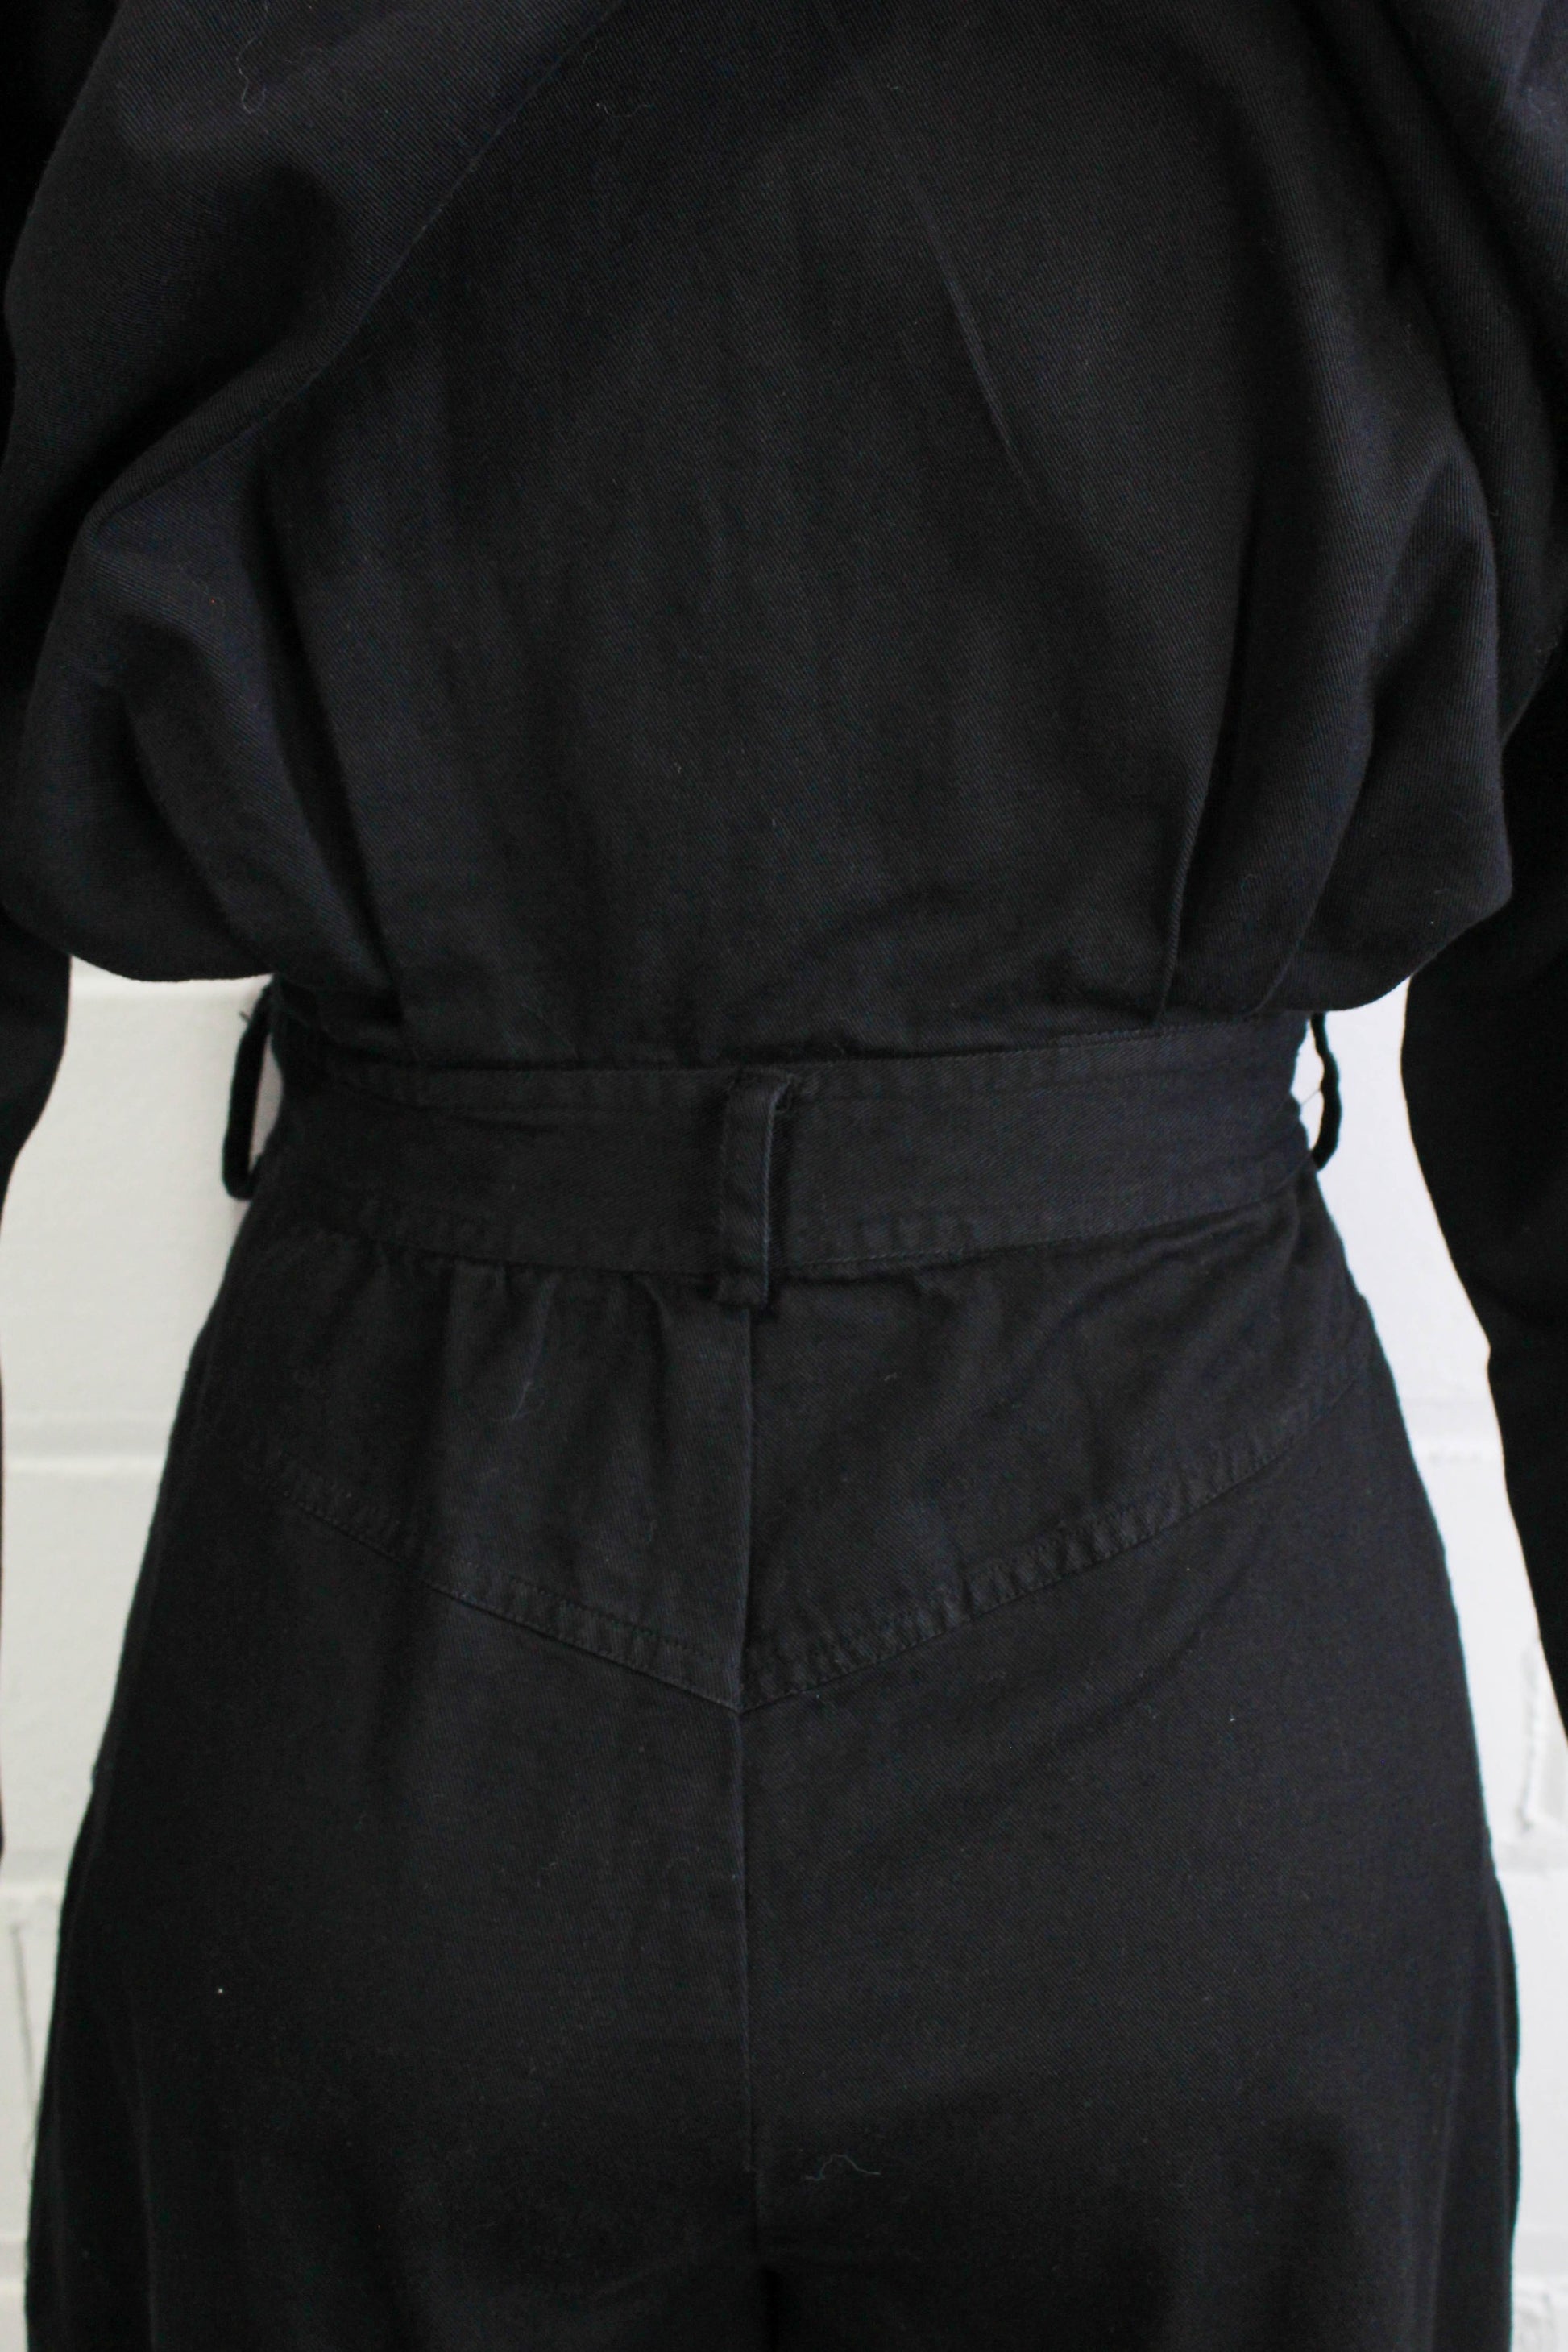 1980s womens jumpsuit black cotton with bib front, collar button up back view waist close up